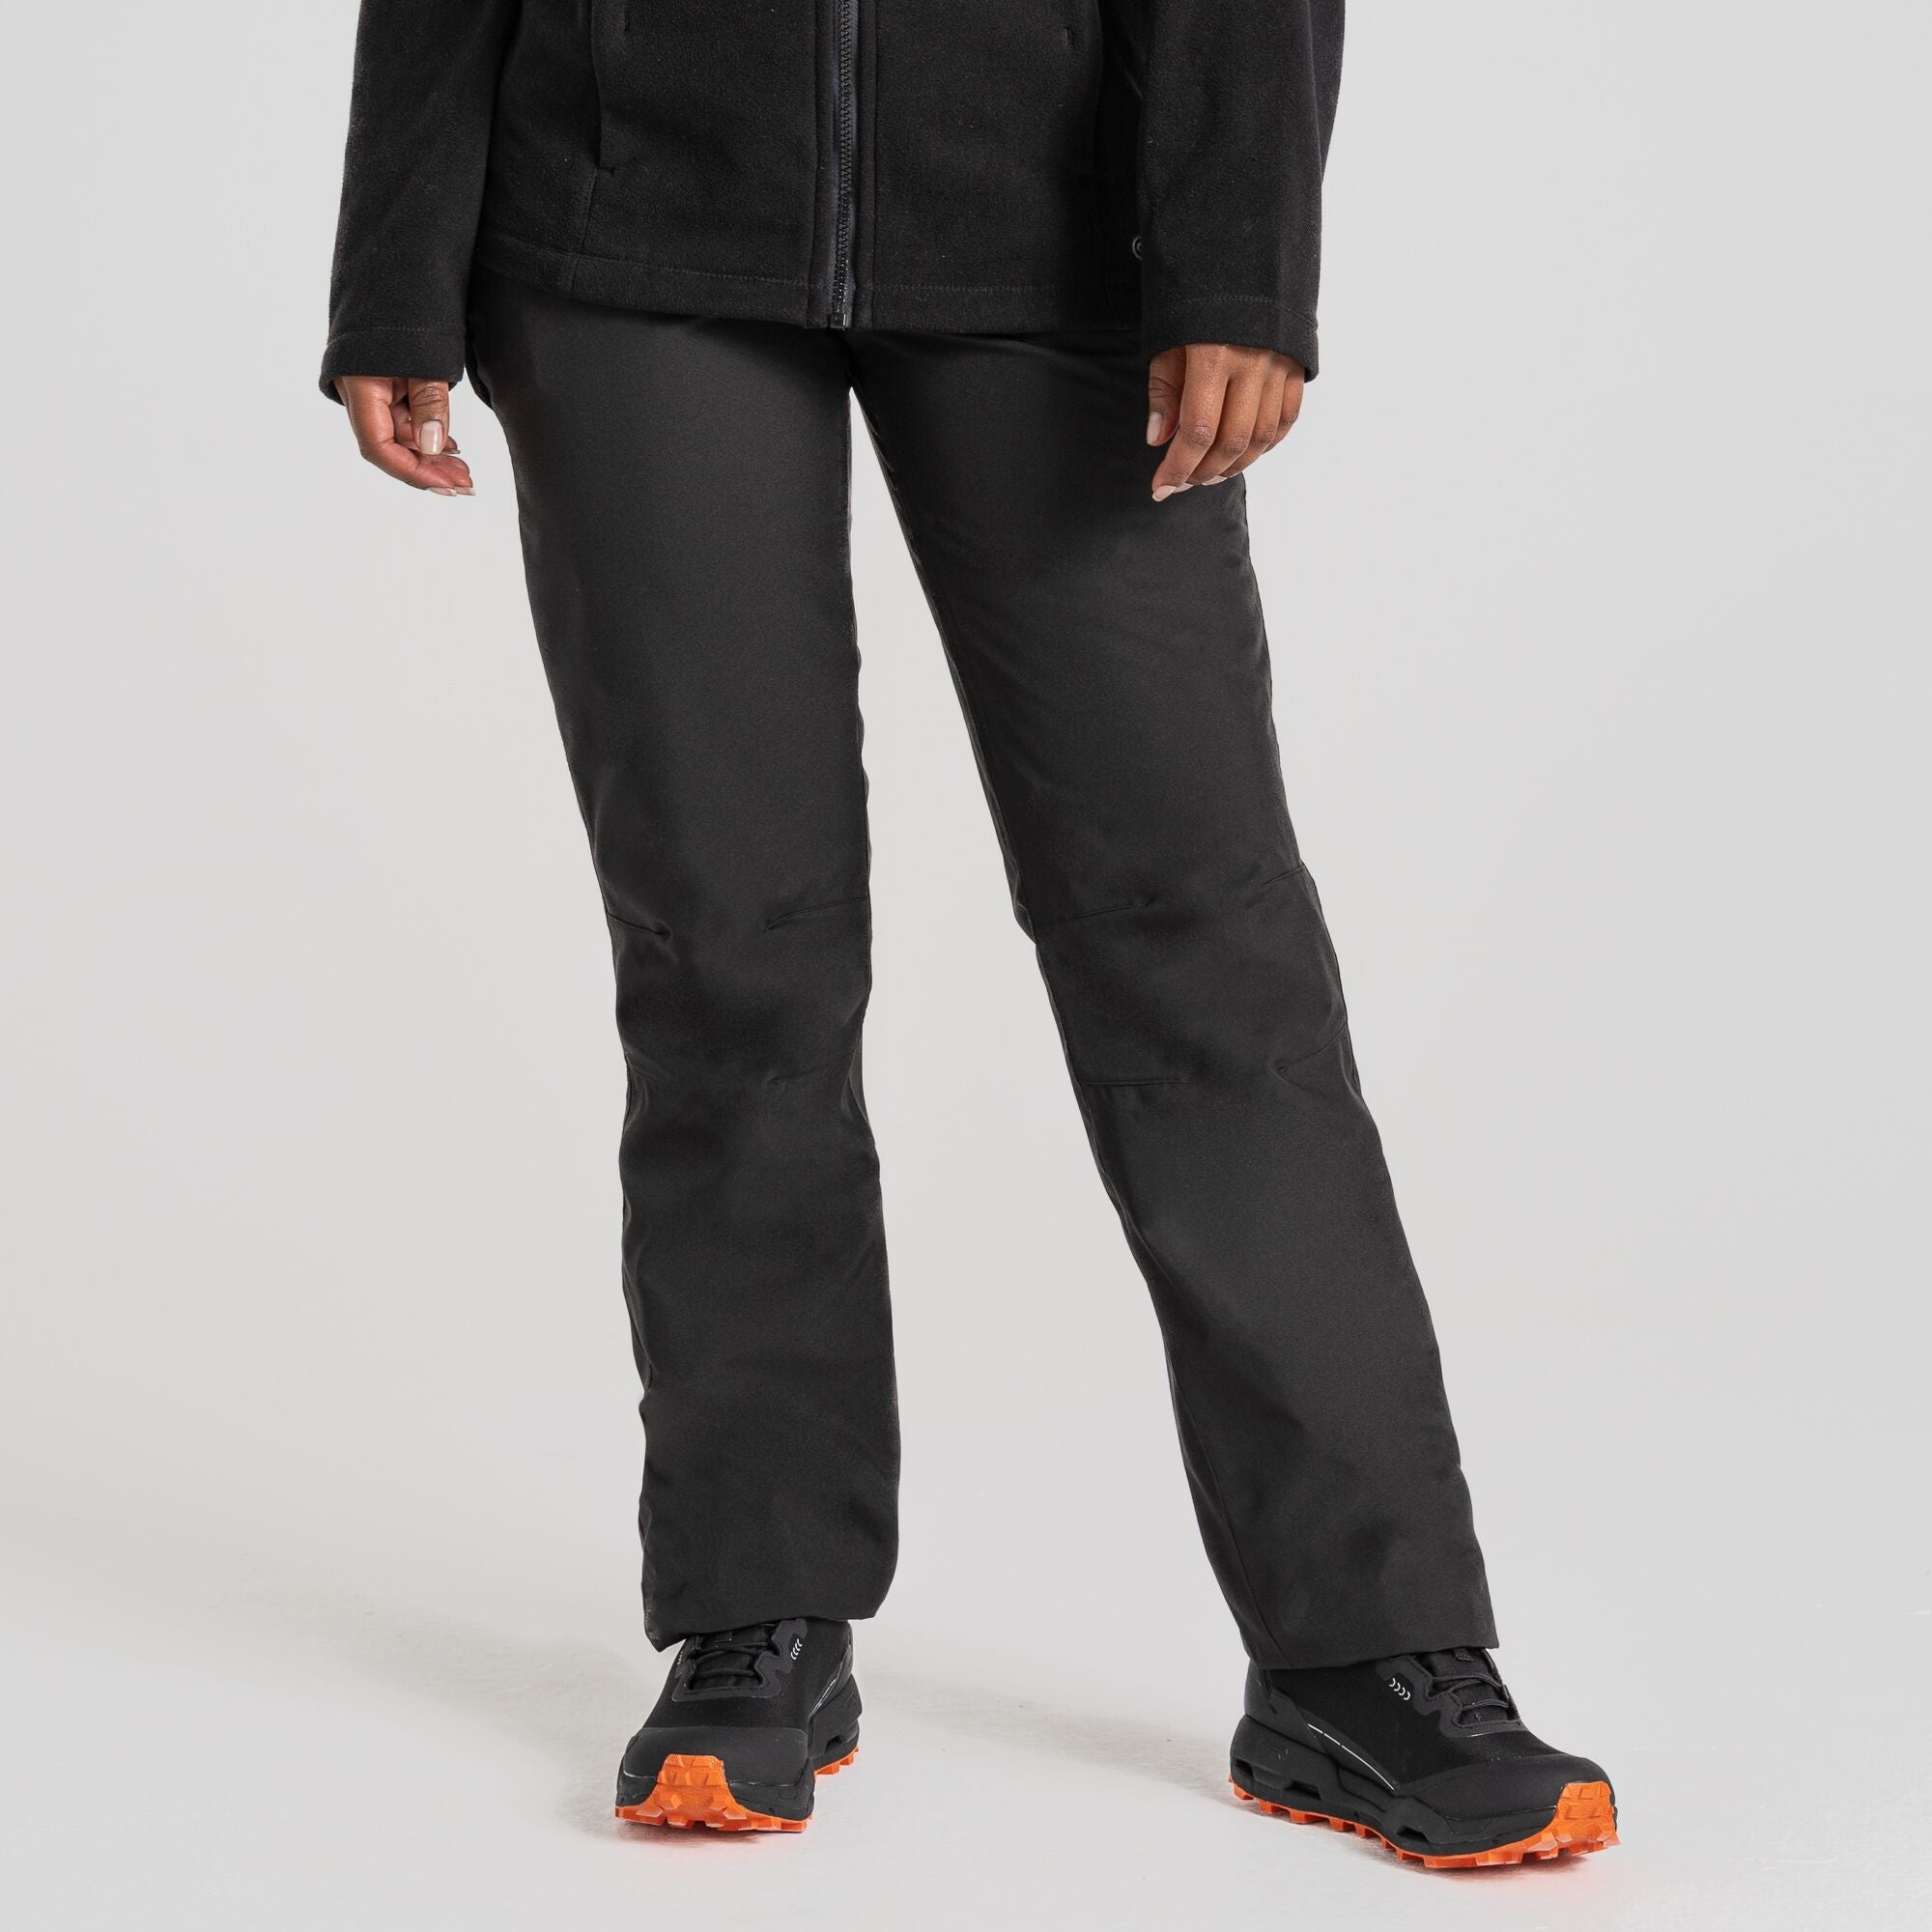 Craghoppers Women's Aysgarth II Thermo Waterproof Trousers | Craghoppers | Portwest - The Outdoor Shop